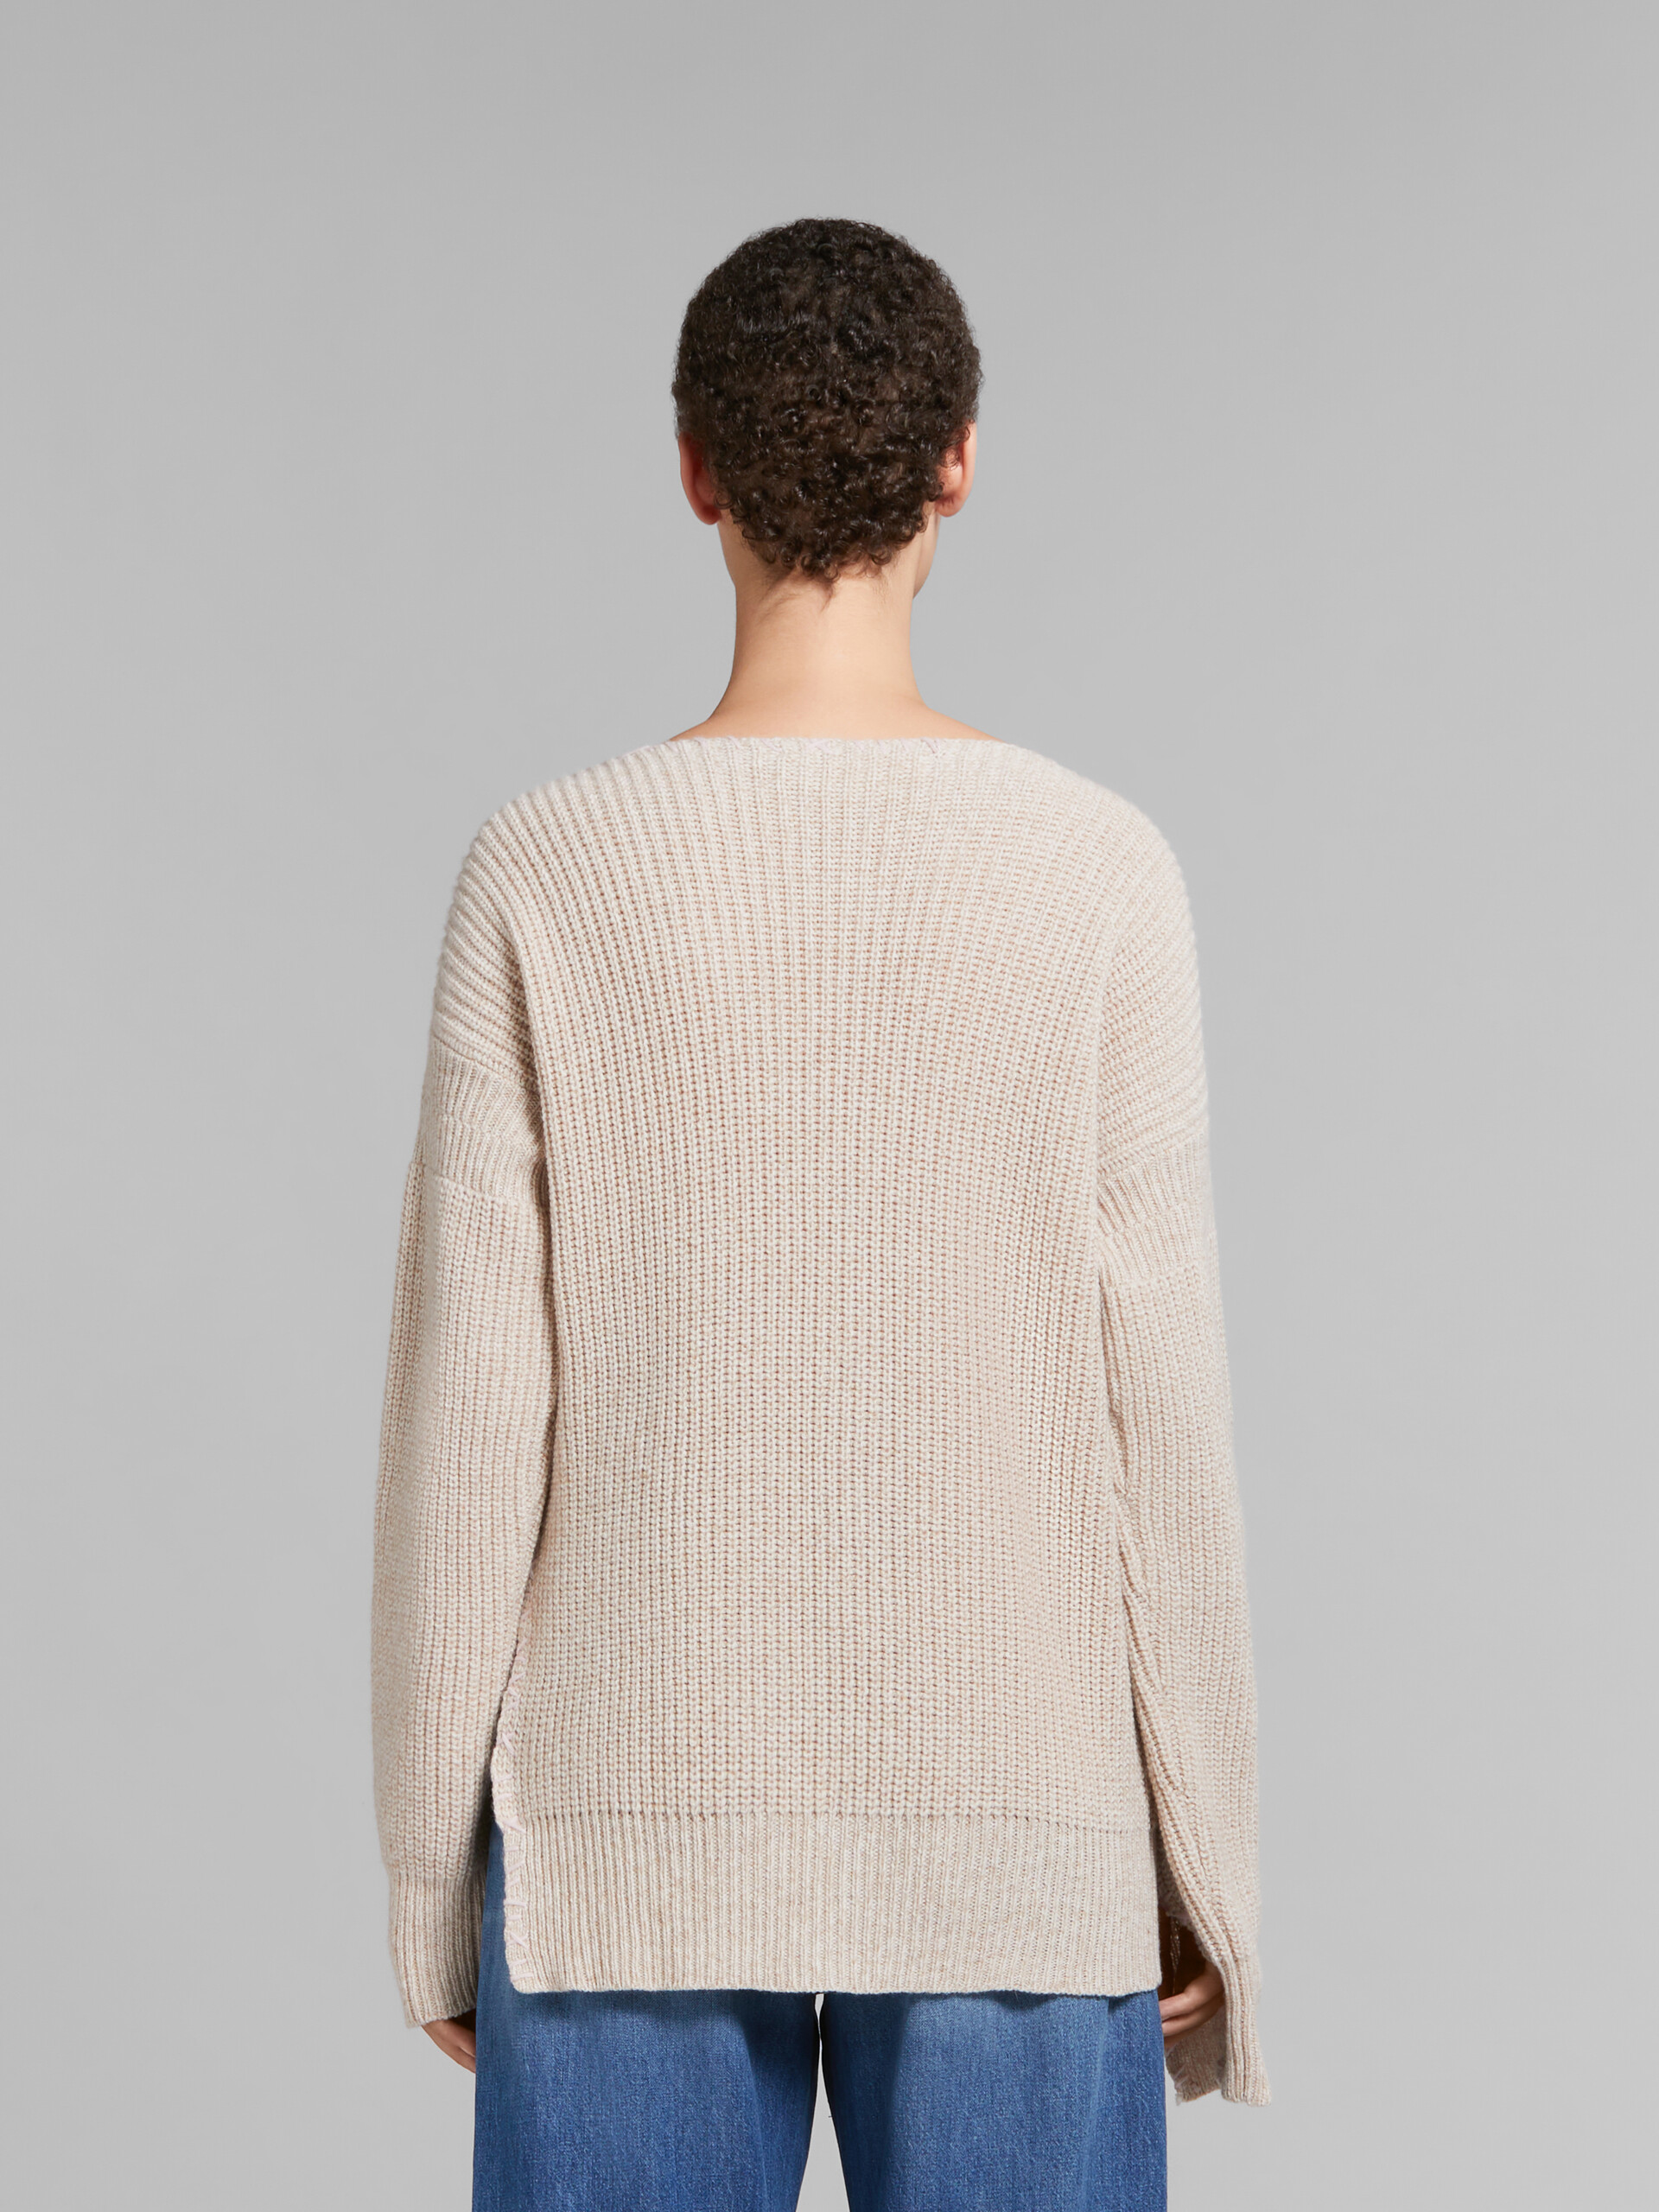 Oat wool cardigan with Marni mending - Pullovers - Image 3